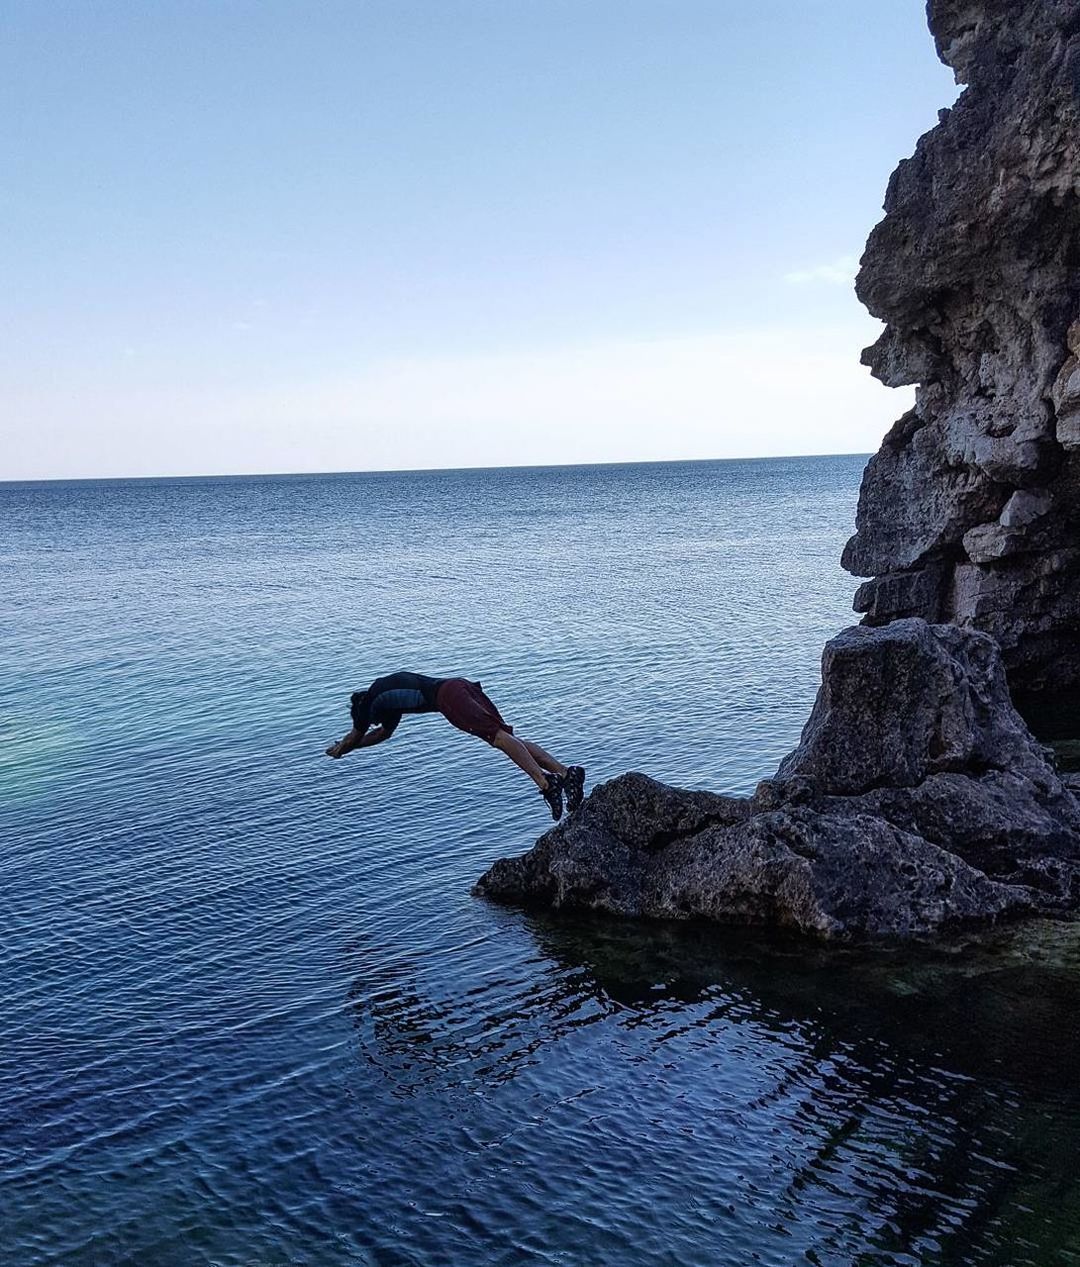 Woman diving from cliff in sea